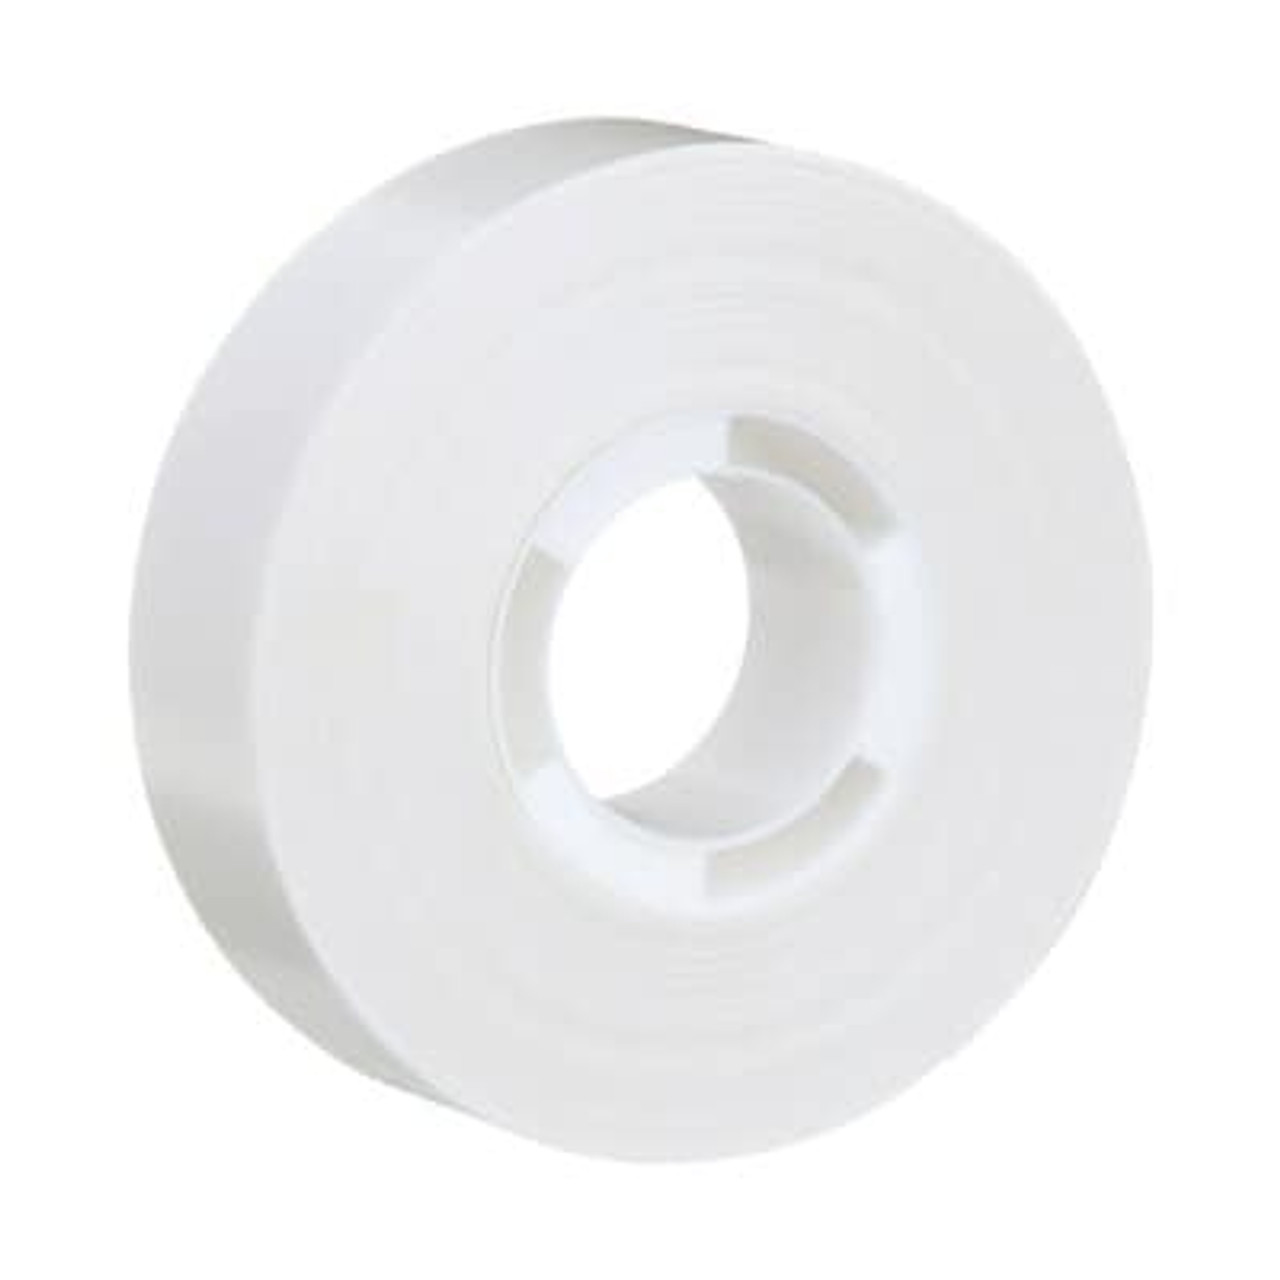  Scotch Double Sided Tape, 0.5 in. x 250 in., 6